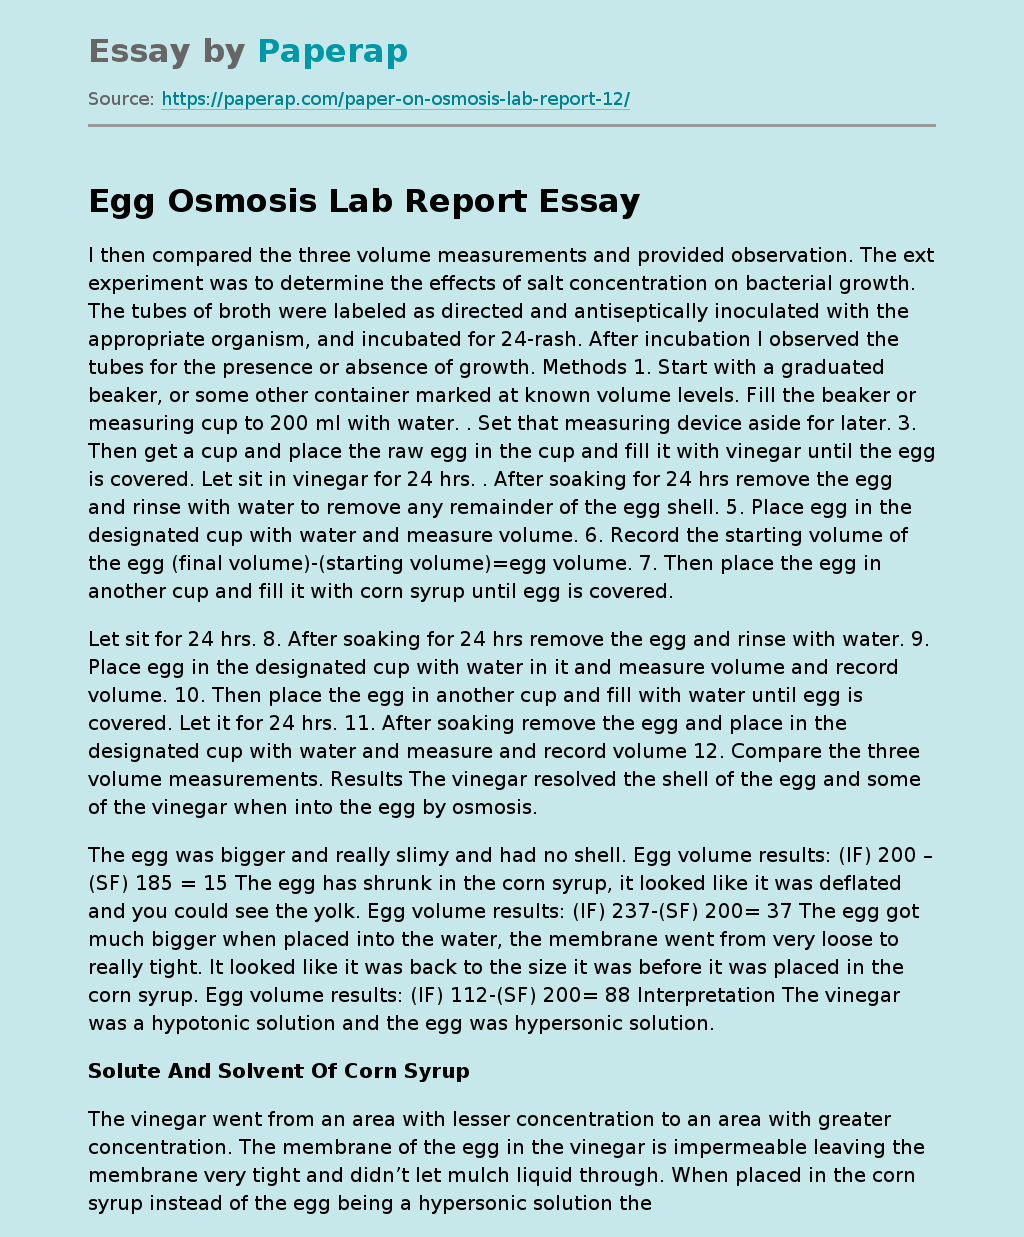 Egg Osmosis Lab Report